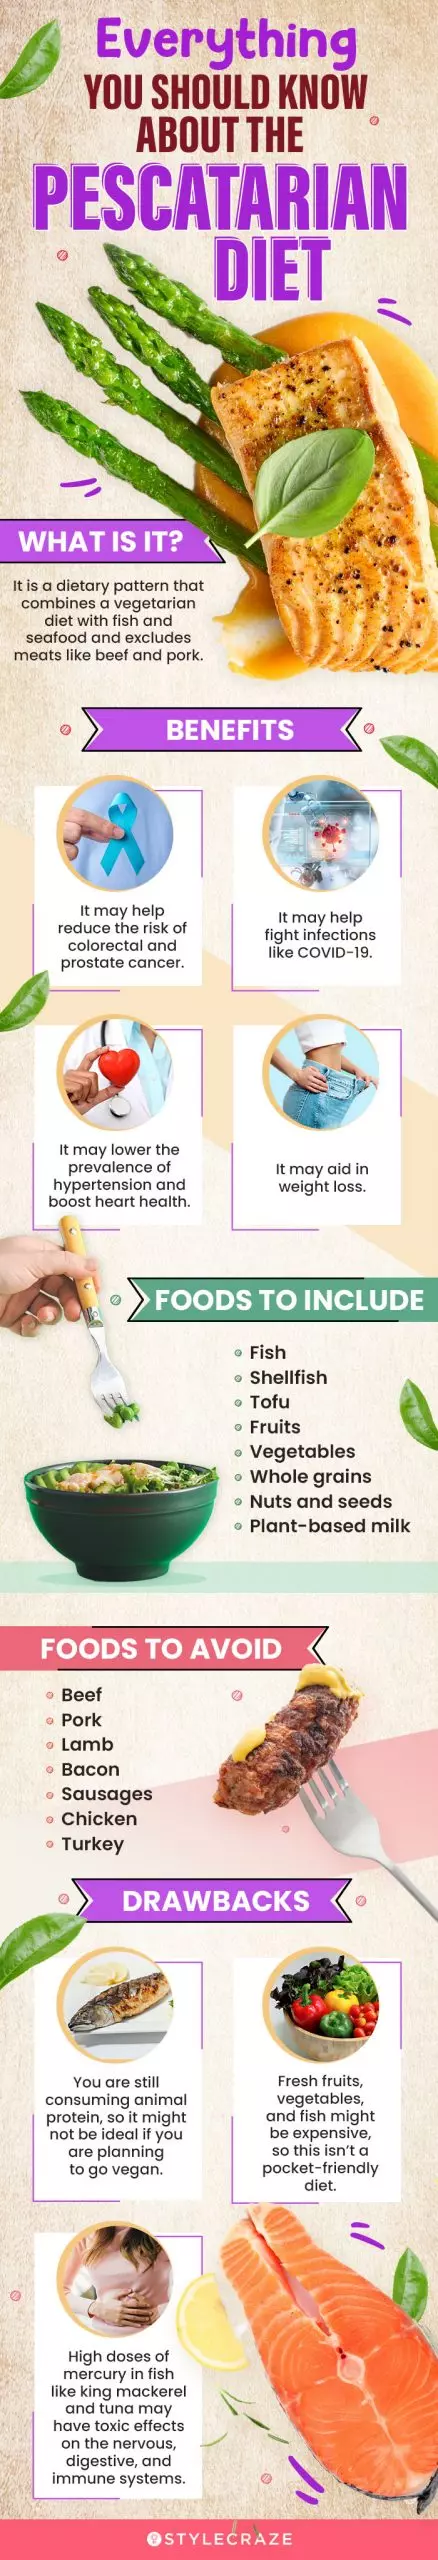 everything you should know about the pescatarian diet 2 (infographic)